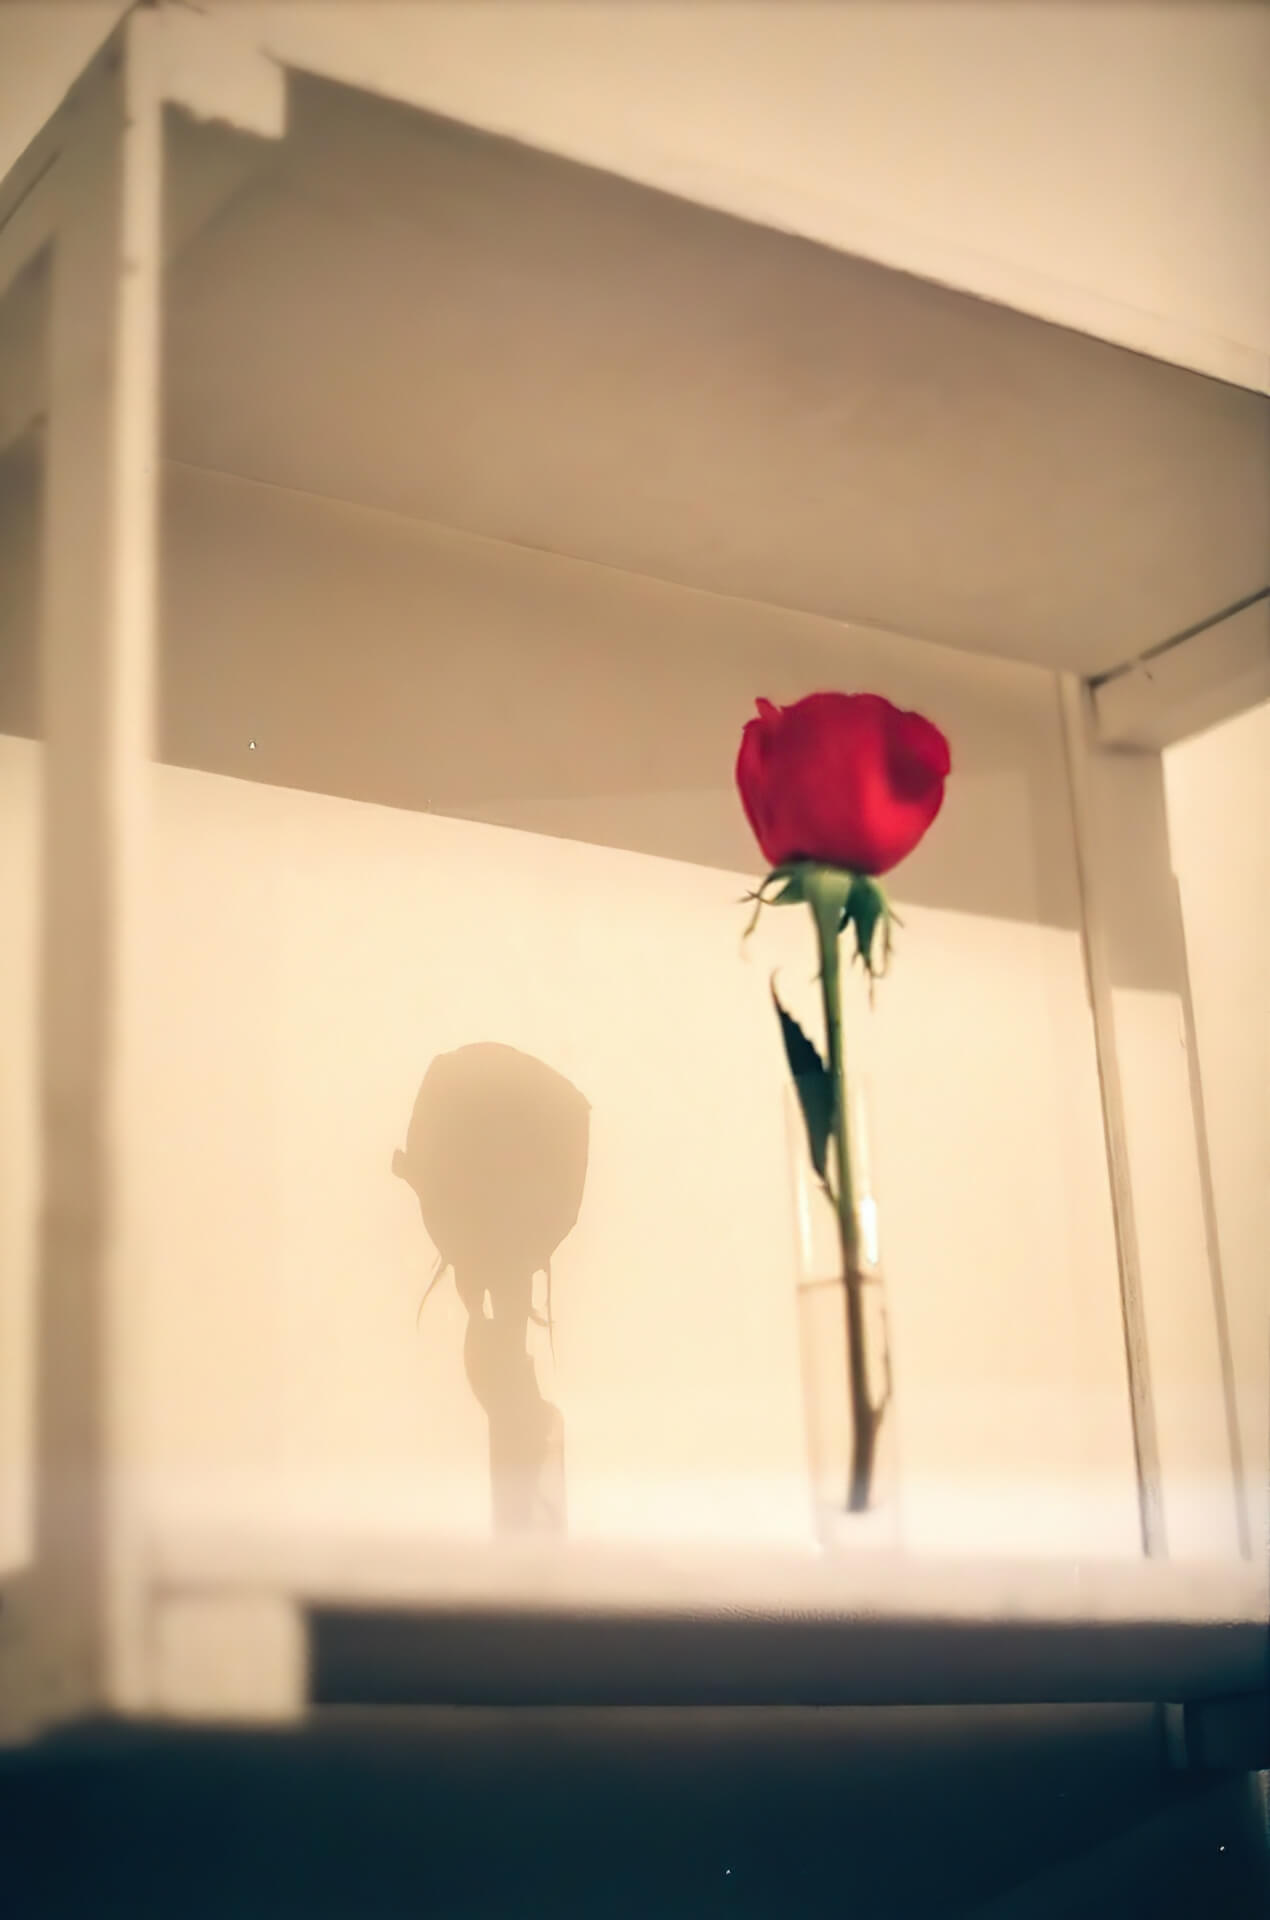 A rose in a water tube on a shelf